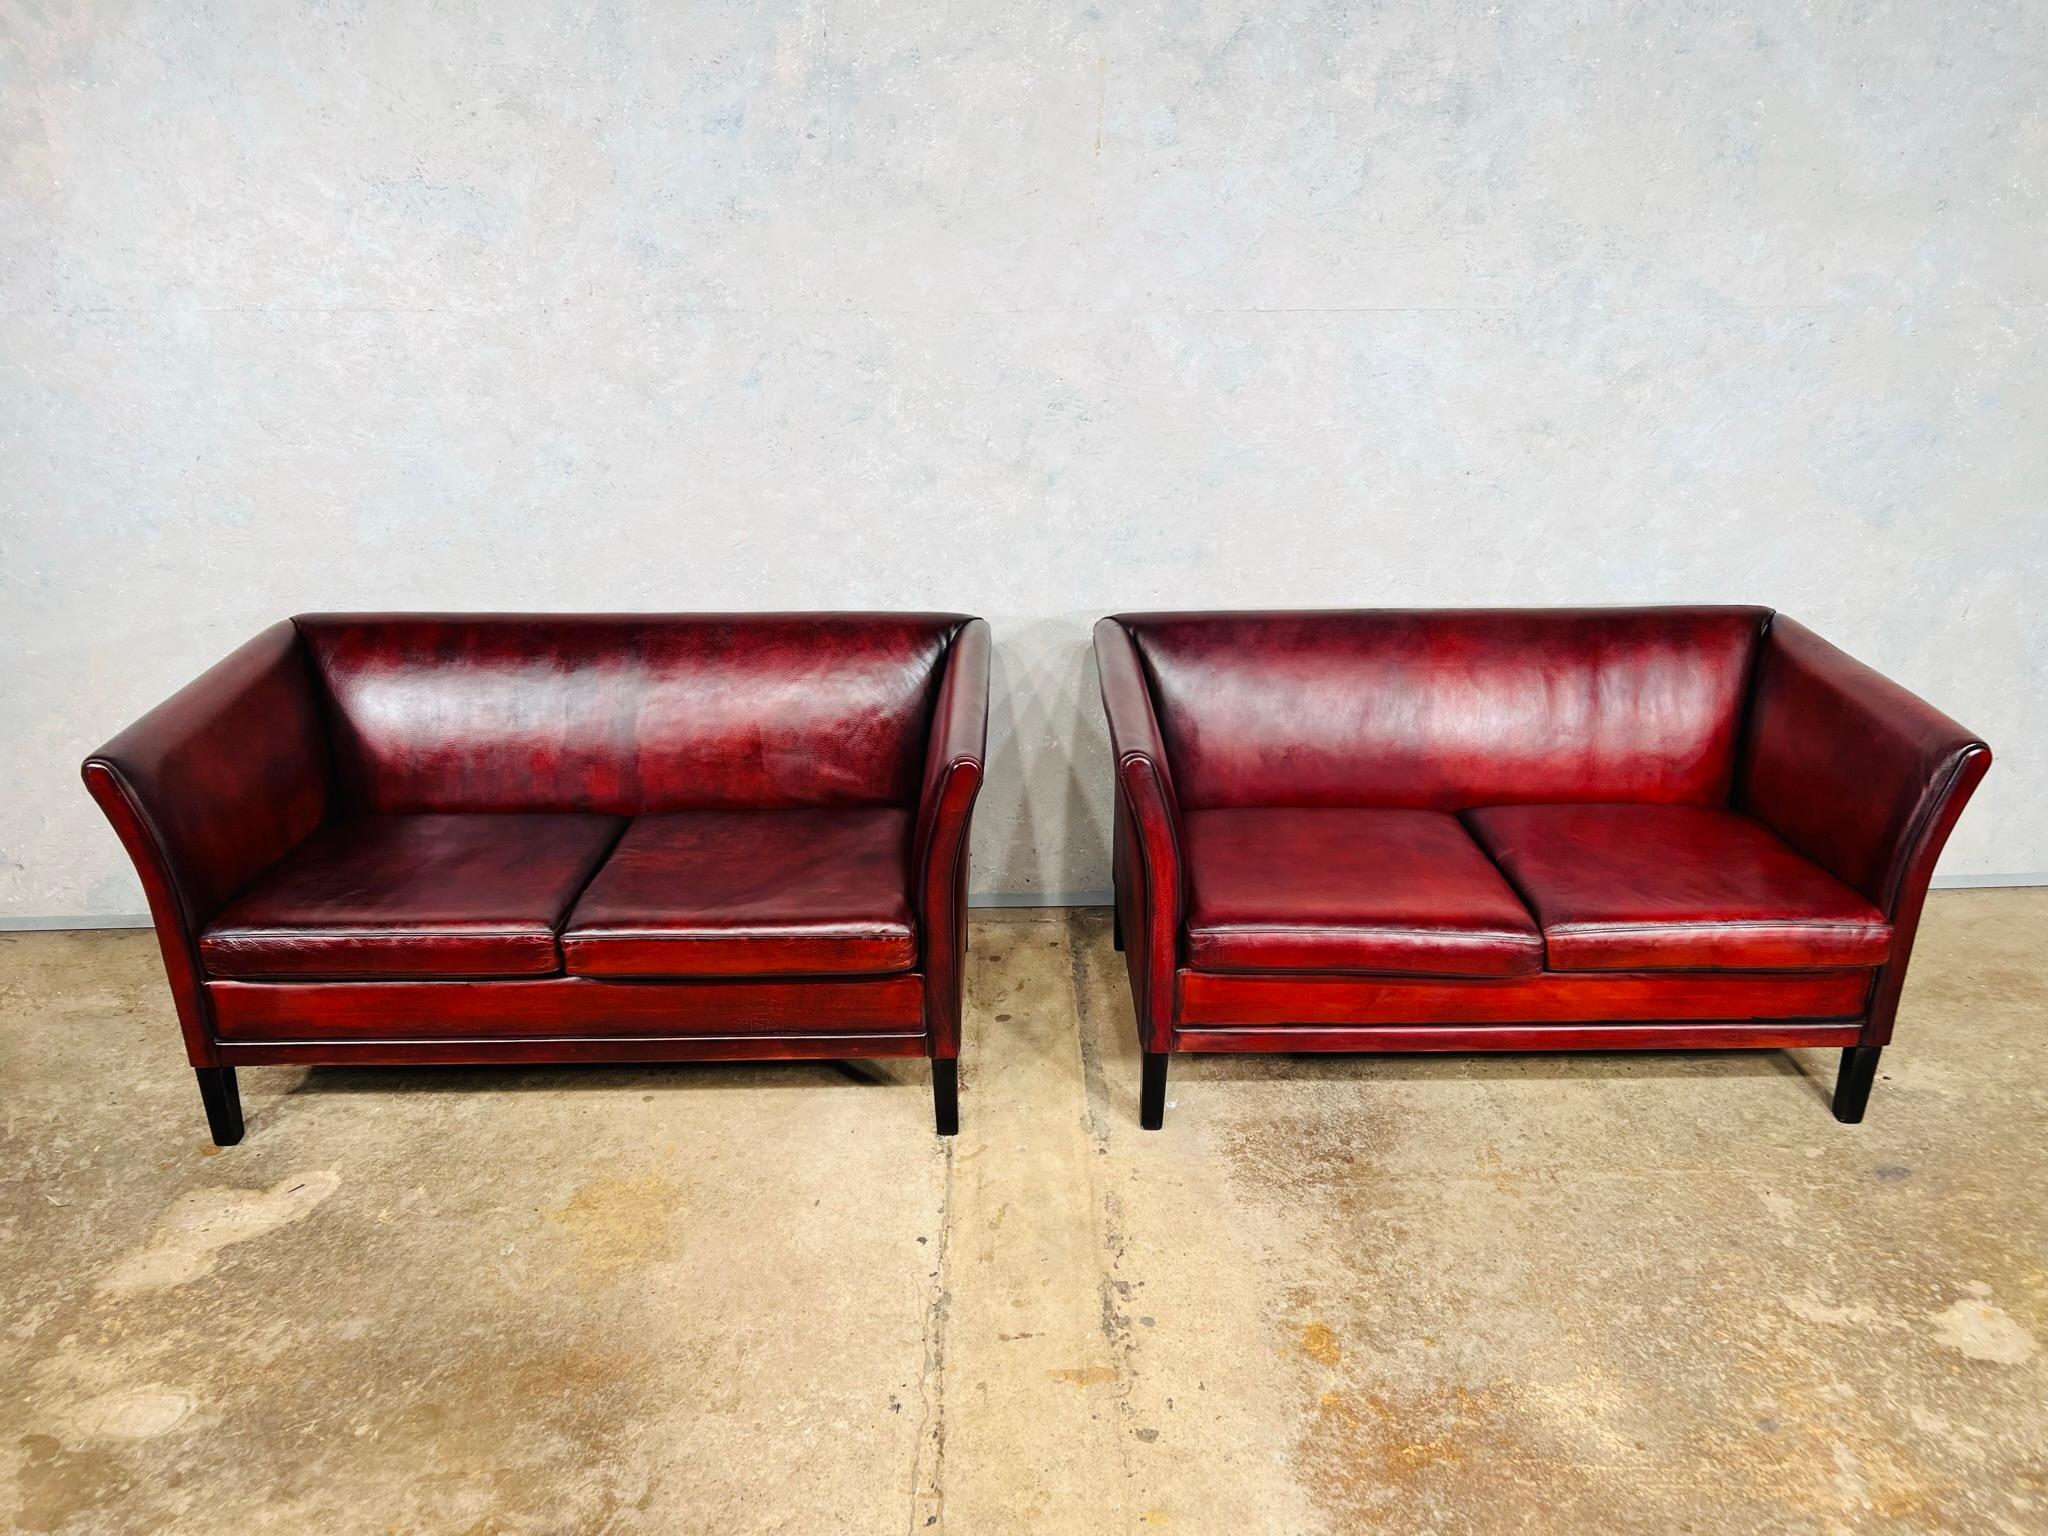 Pair of Neat Vintage Danish 70s Patinated Chestnut Red 2 Seat Leather Sofas#805 In Good Condition For Sale In Lewes, GB